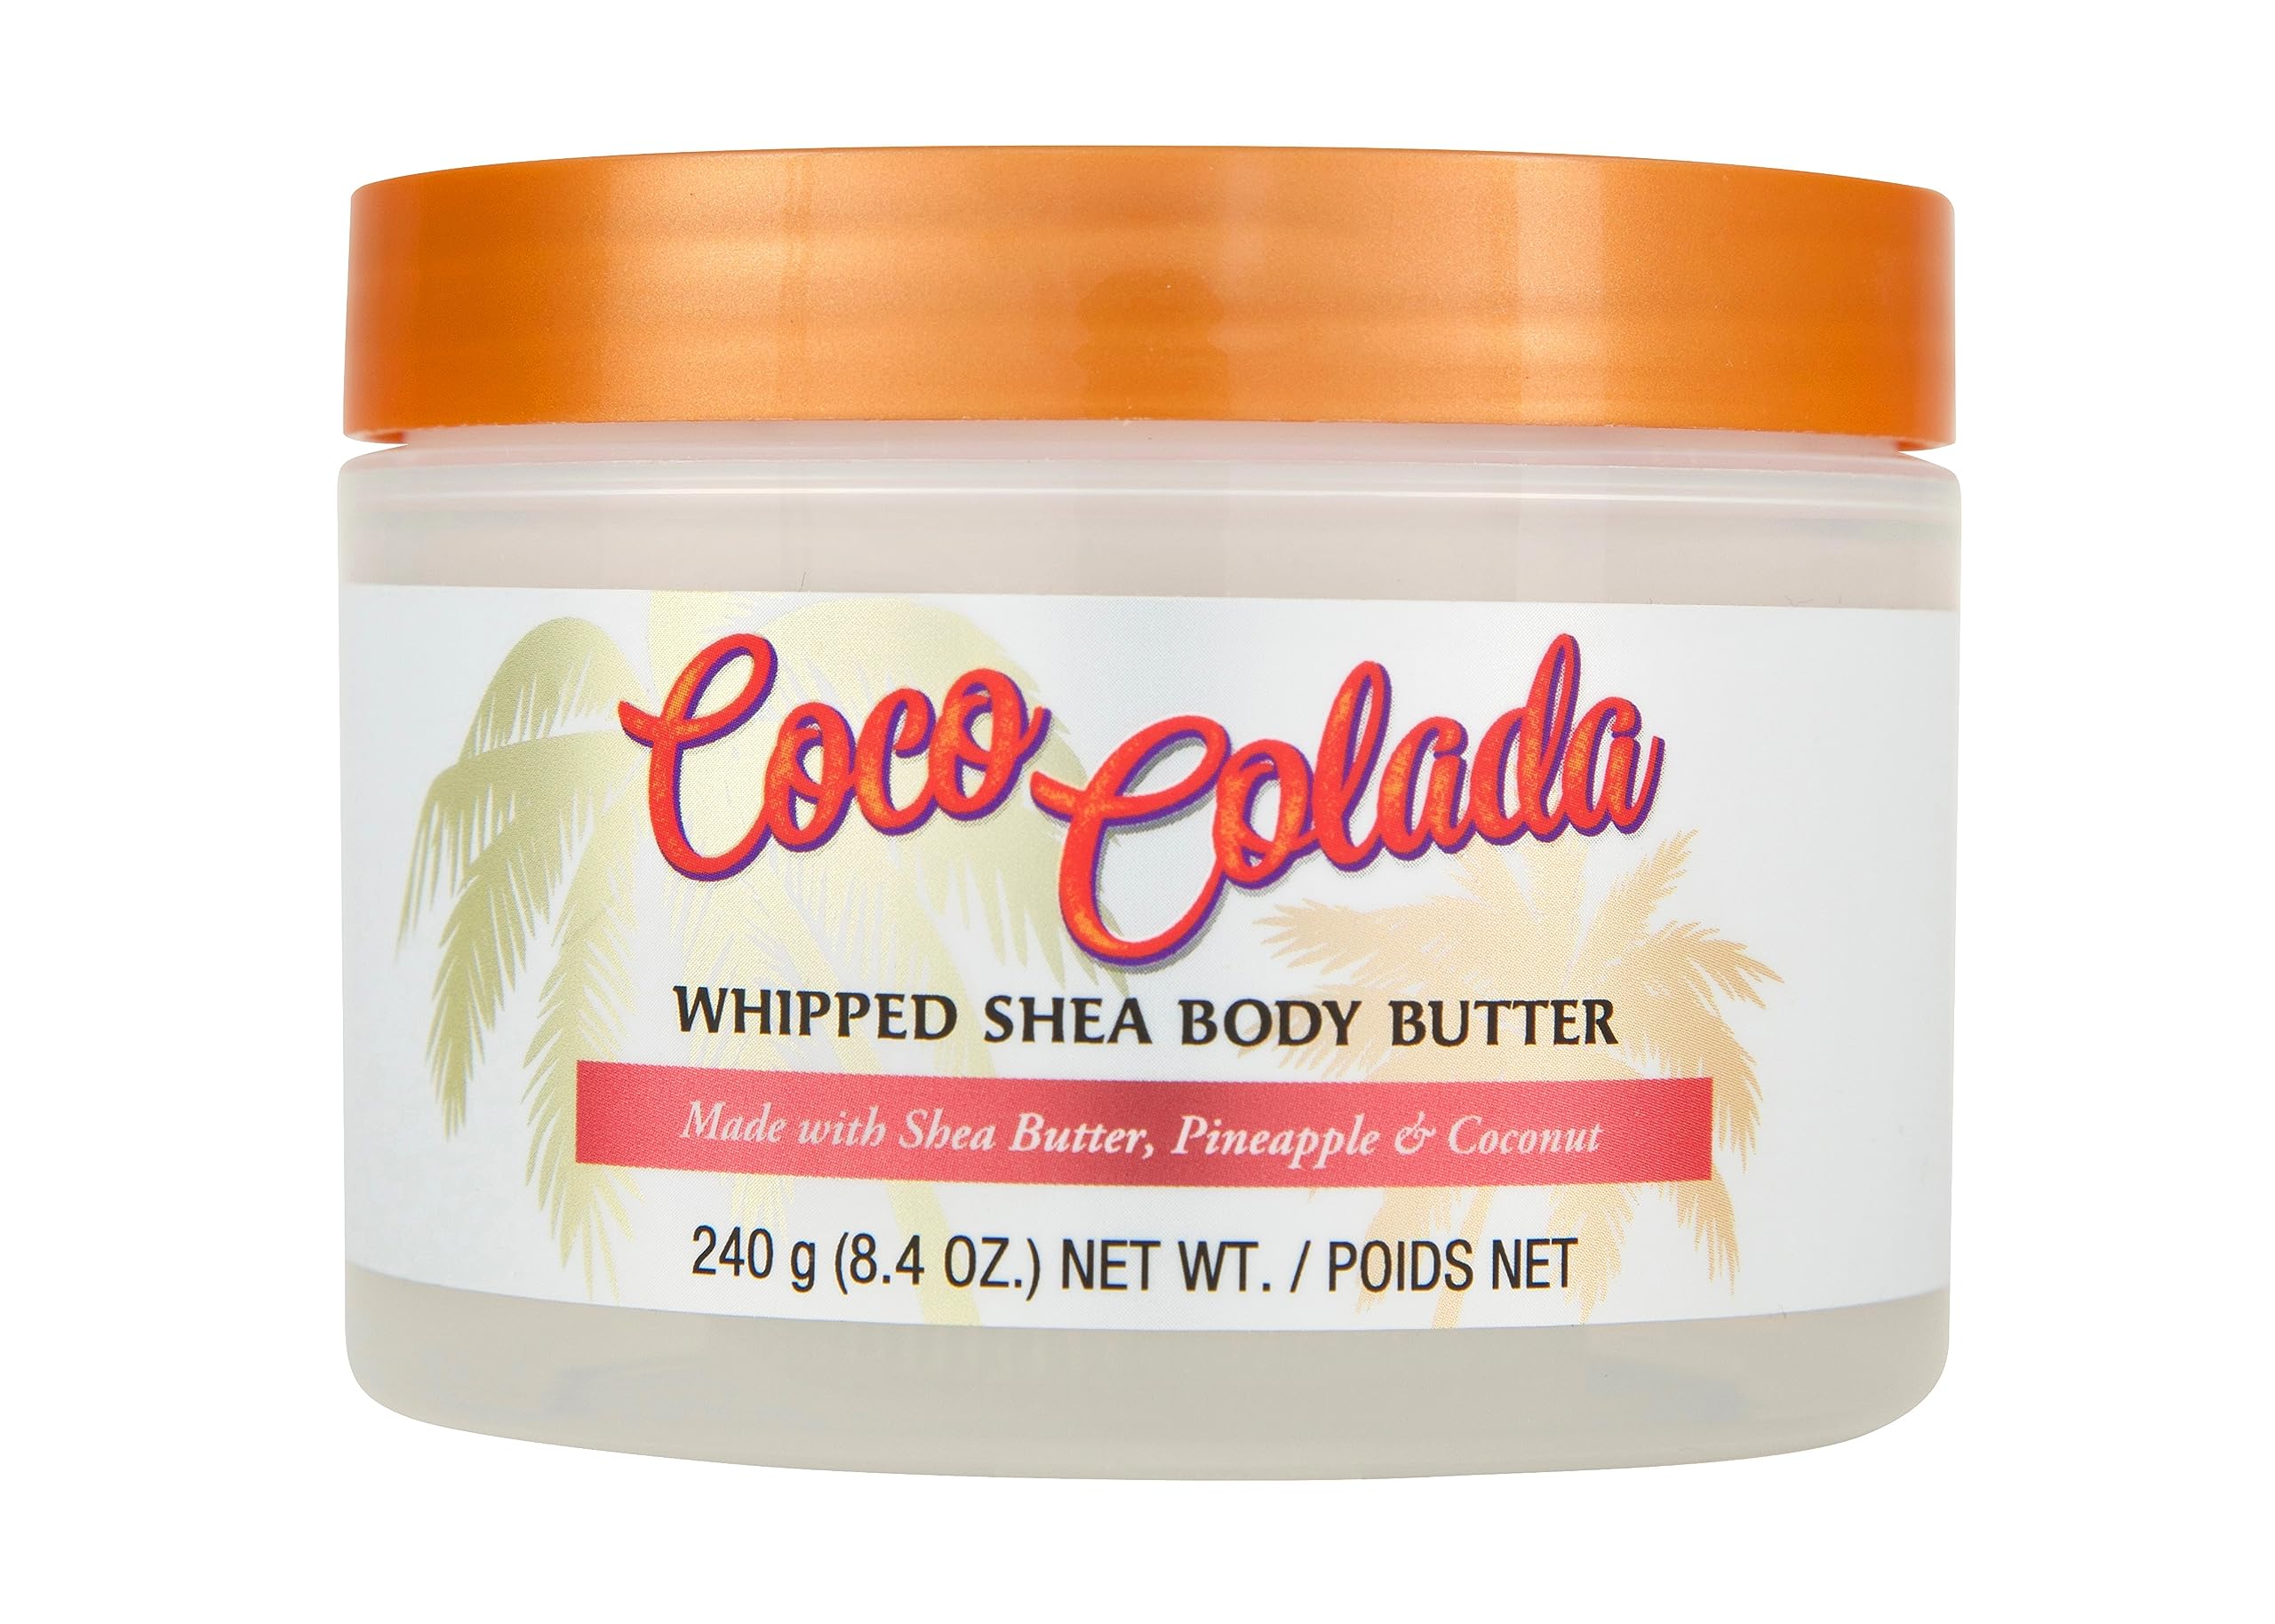 Tree Hut Coco Colada Whipped Shea Body Butter, 8.4oz, with Natural Shea Butter for Nourishing Essential Body Care